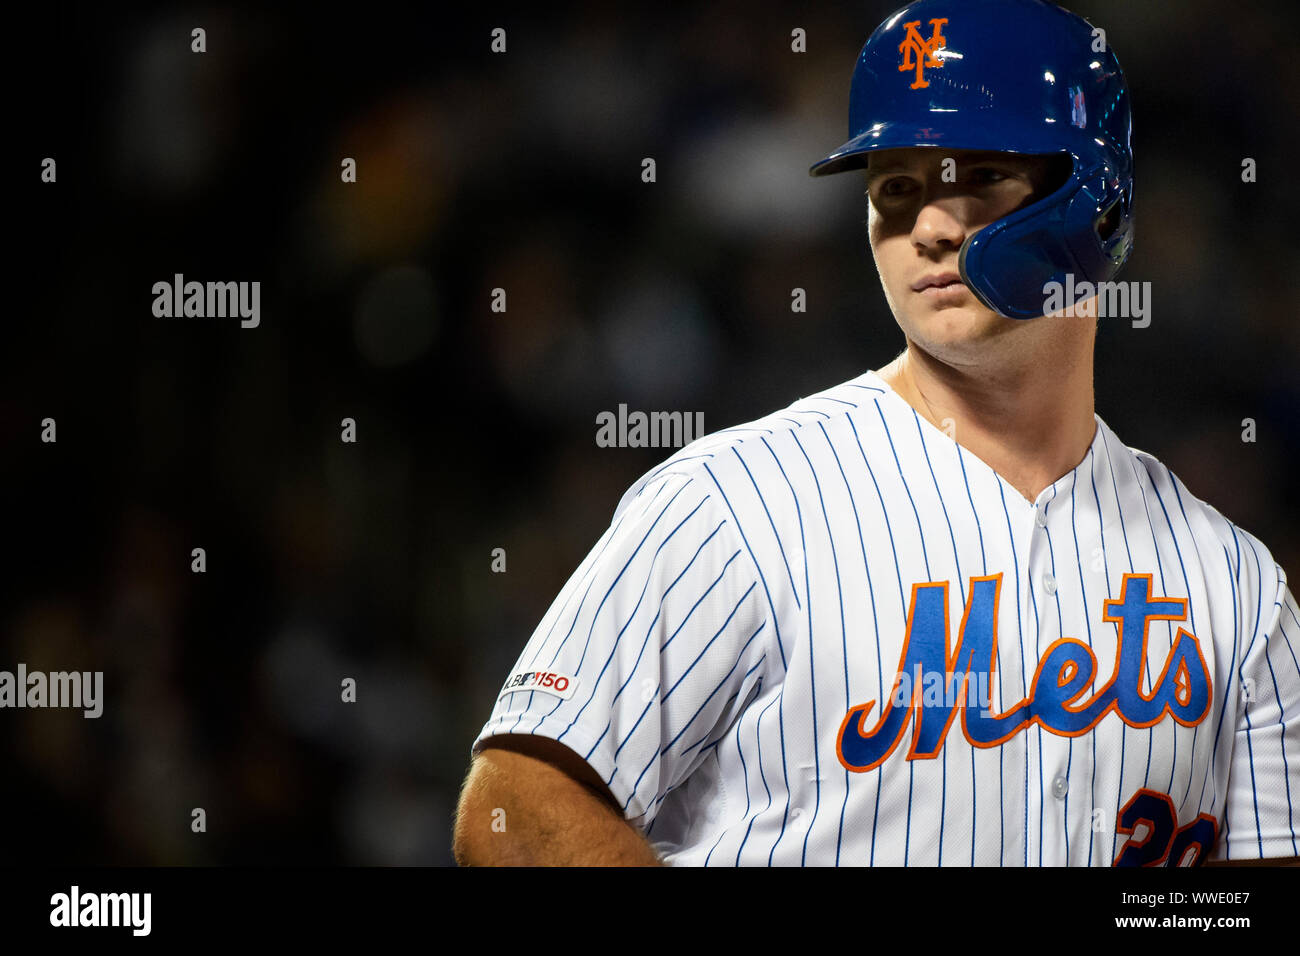 Queens, New York, USA. 13th Sep, 2019. New York Mets first baseman Pete Alonso (20) looks on during the game between The New York Mets and The Los Angeles Dodgers at Citi Field in Queens, New York. Mandatory credit: Kostas Lymperopoulos/CSM/Alamy Live News Stock Photo